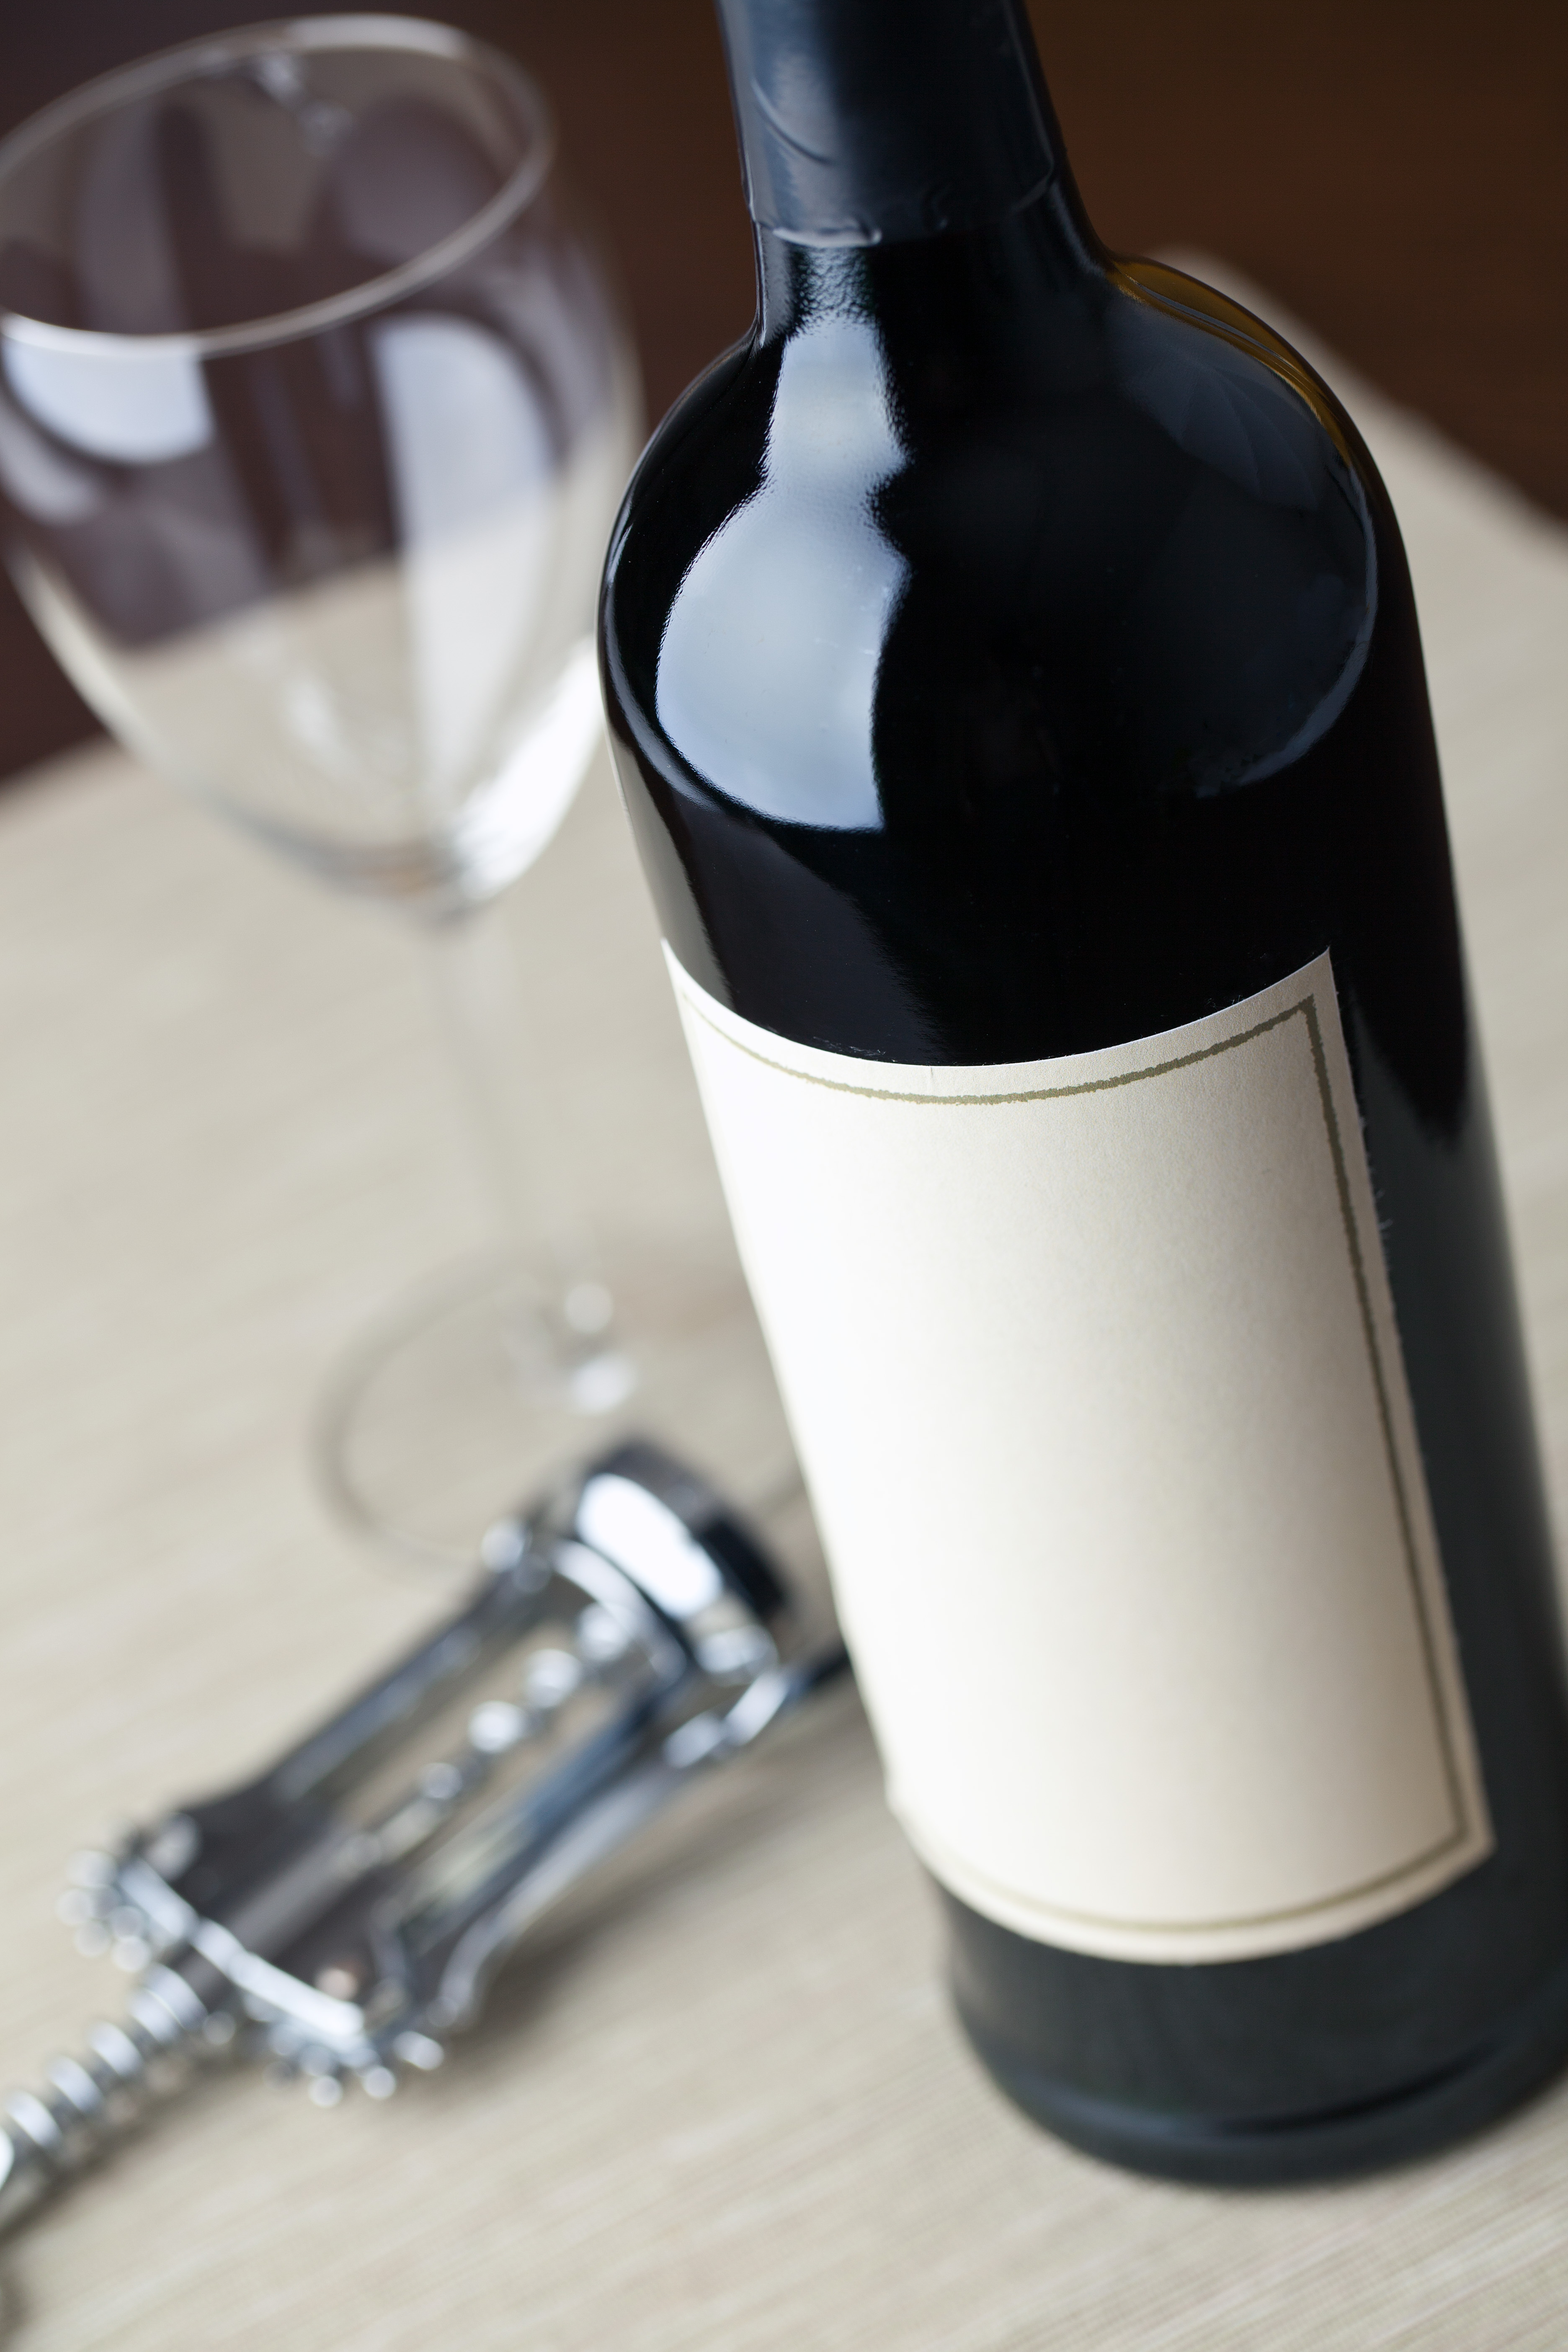 Bottle of red with blank label and glass 55491760 - Why are brands worth investing in?